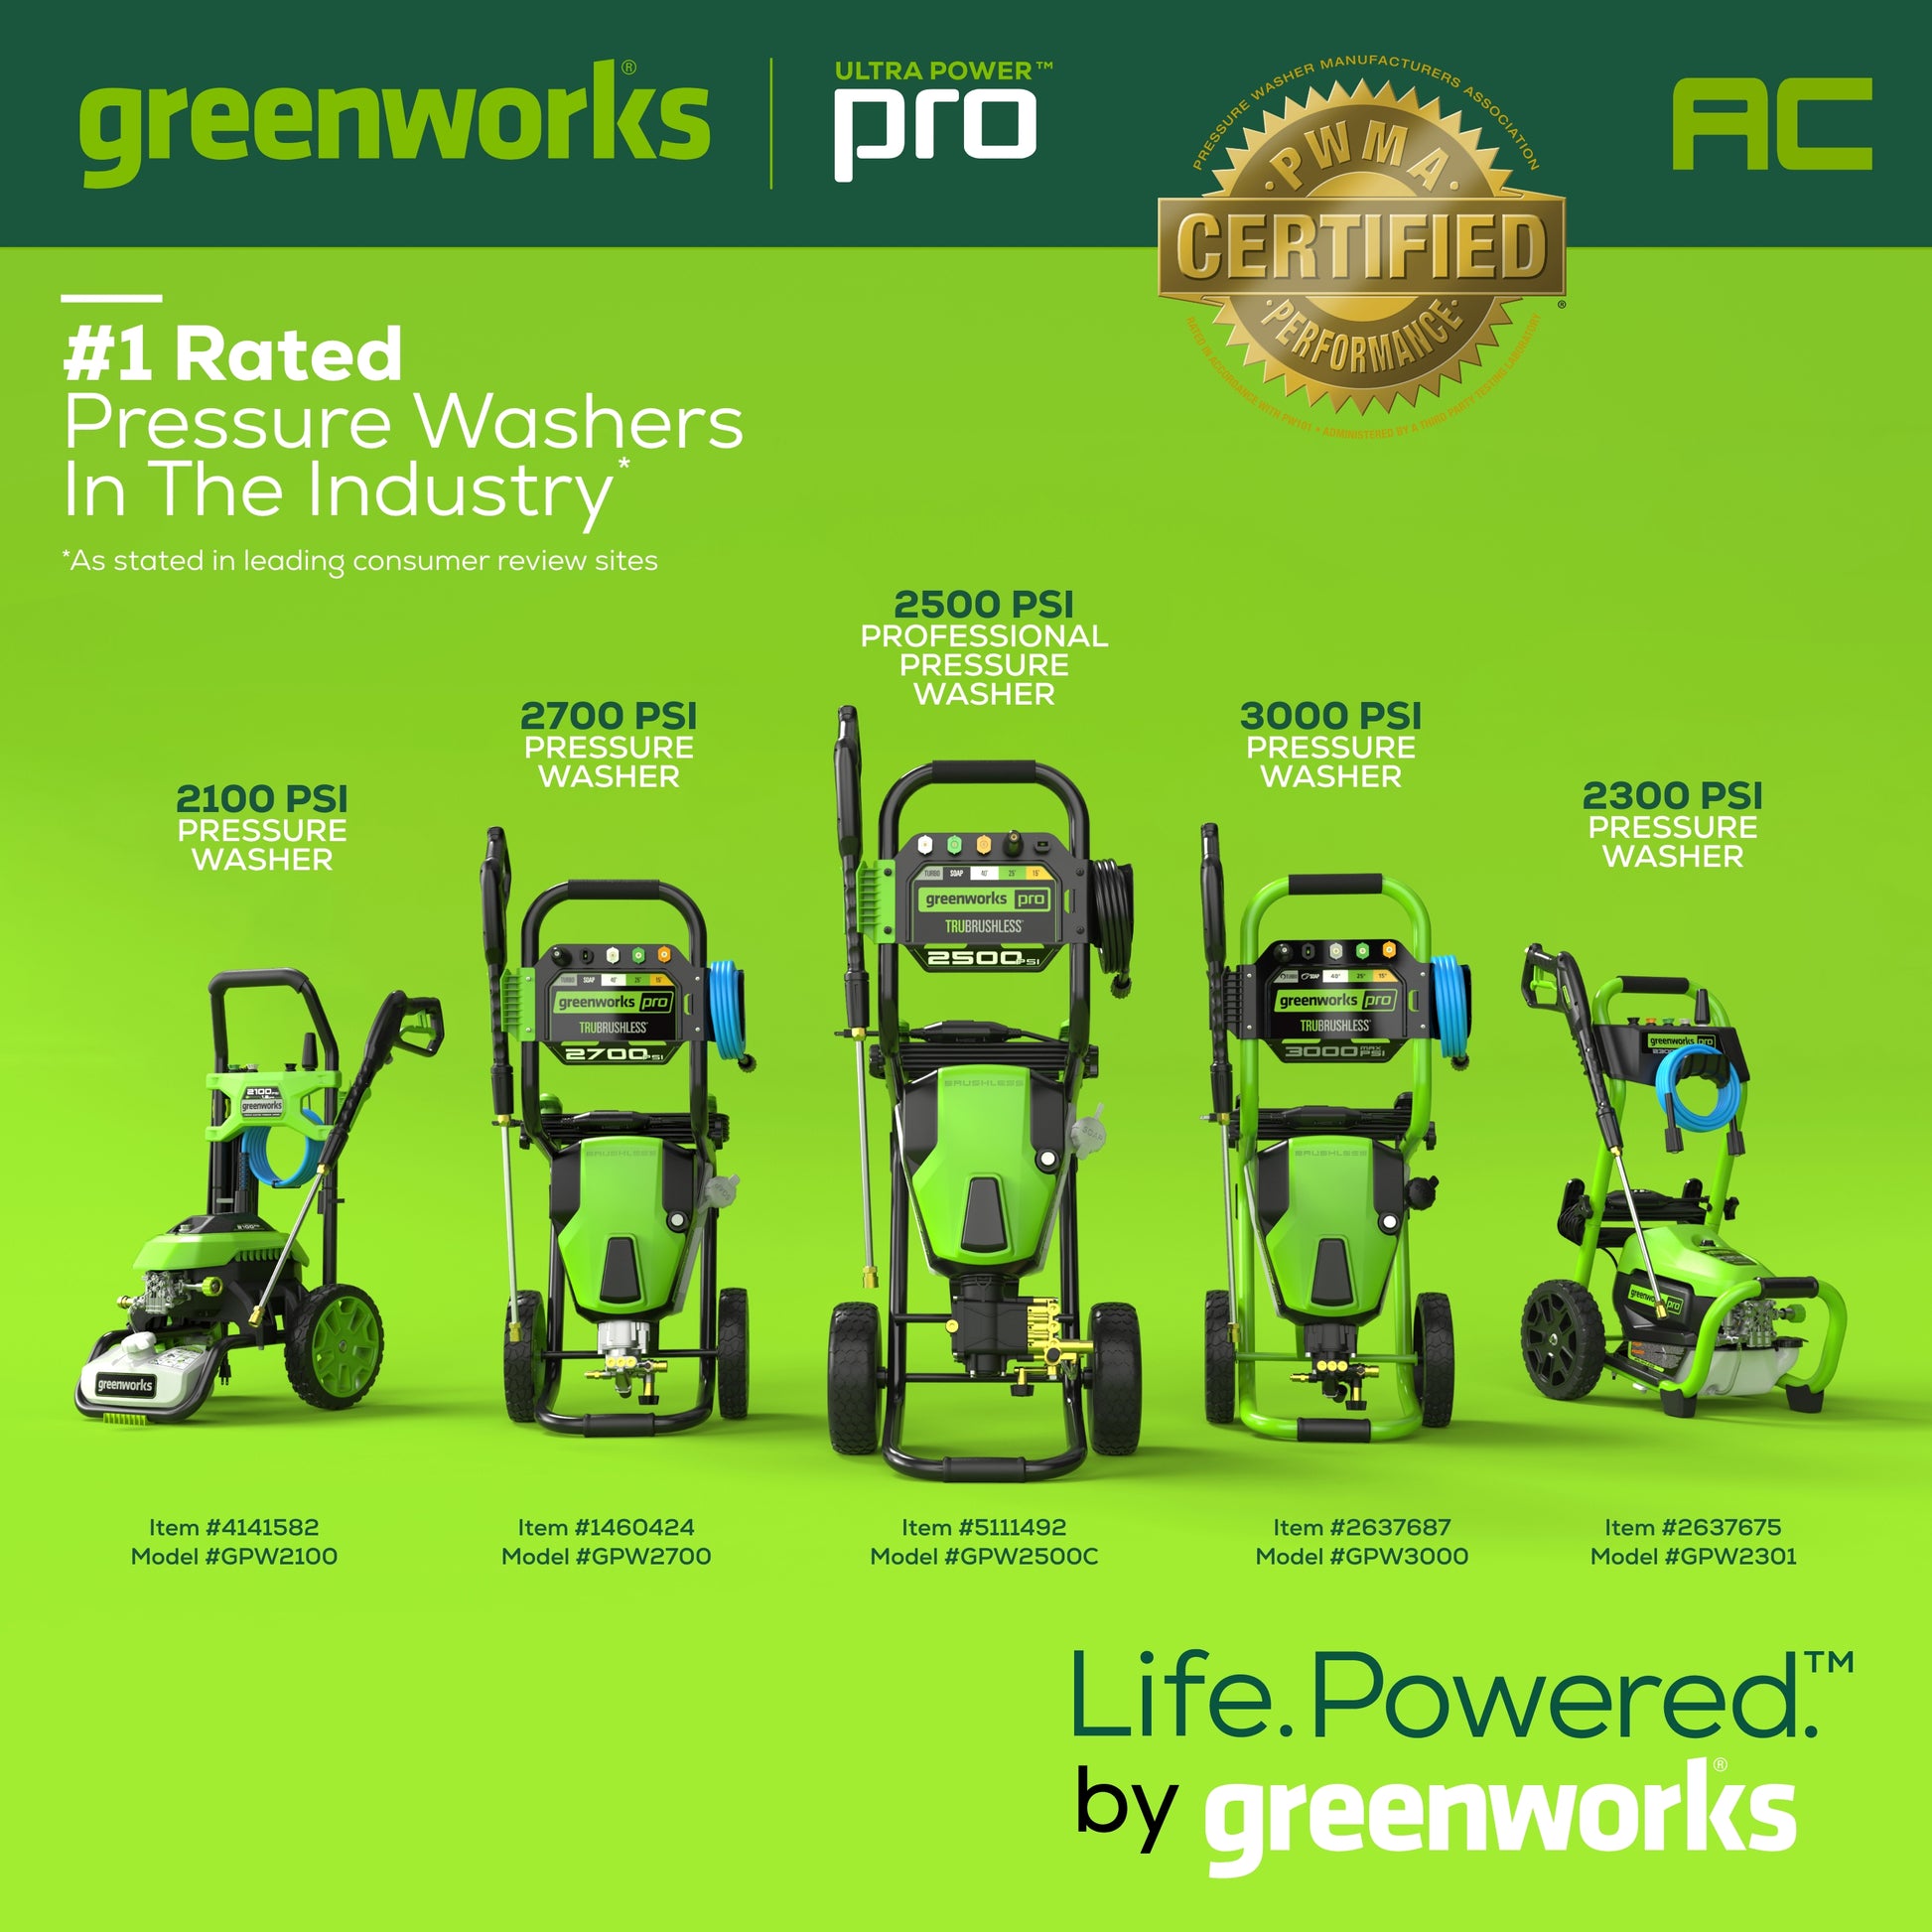 2700-PSI 2.3 GPM Electric Pressure Washer | Greenworks Tools